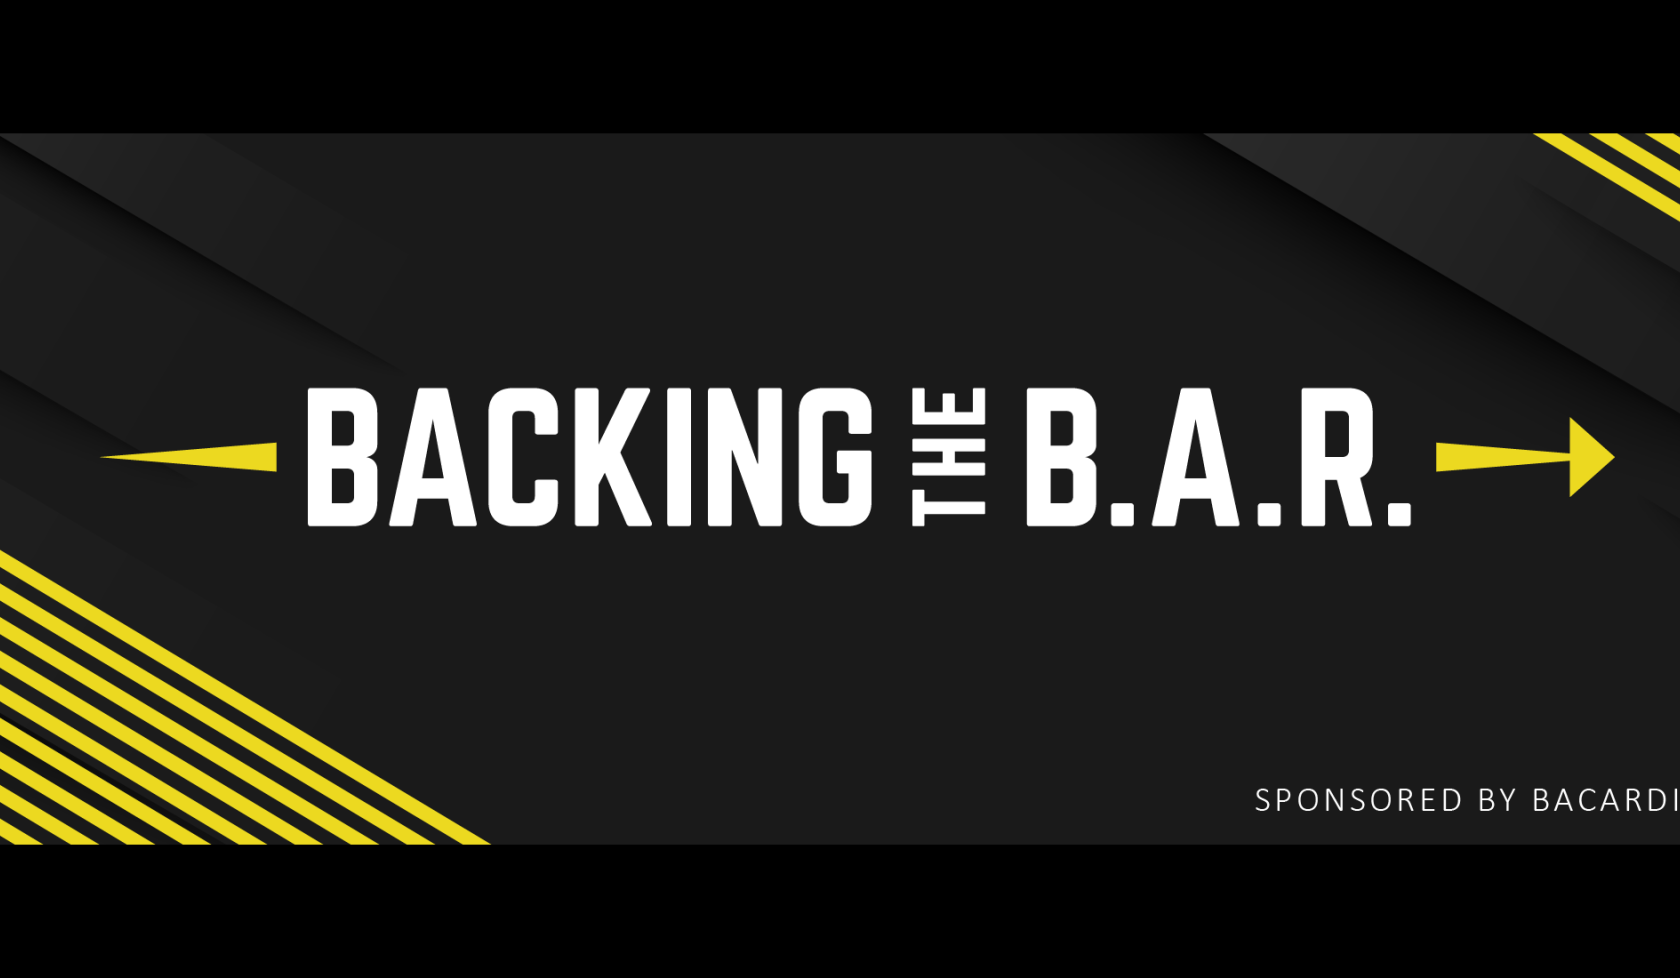 Updated Header - Backing the BAR